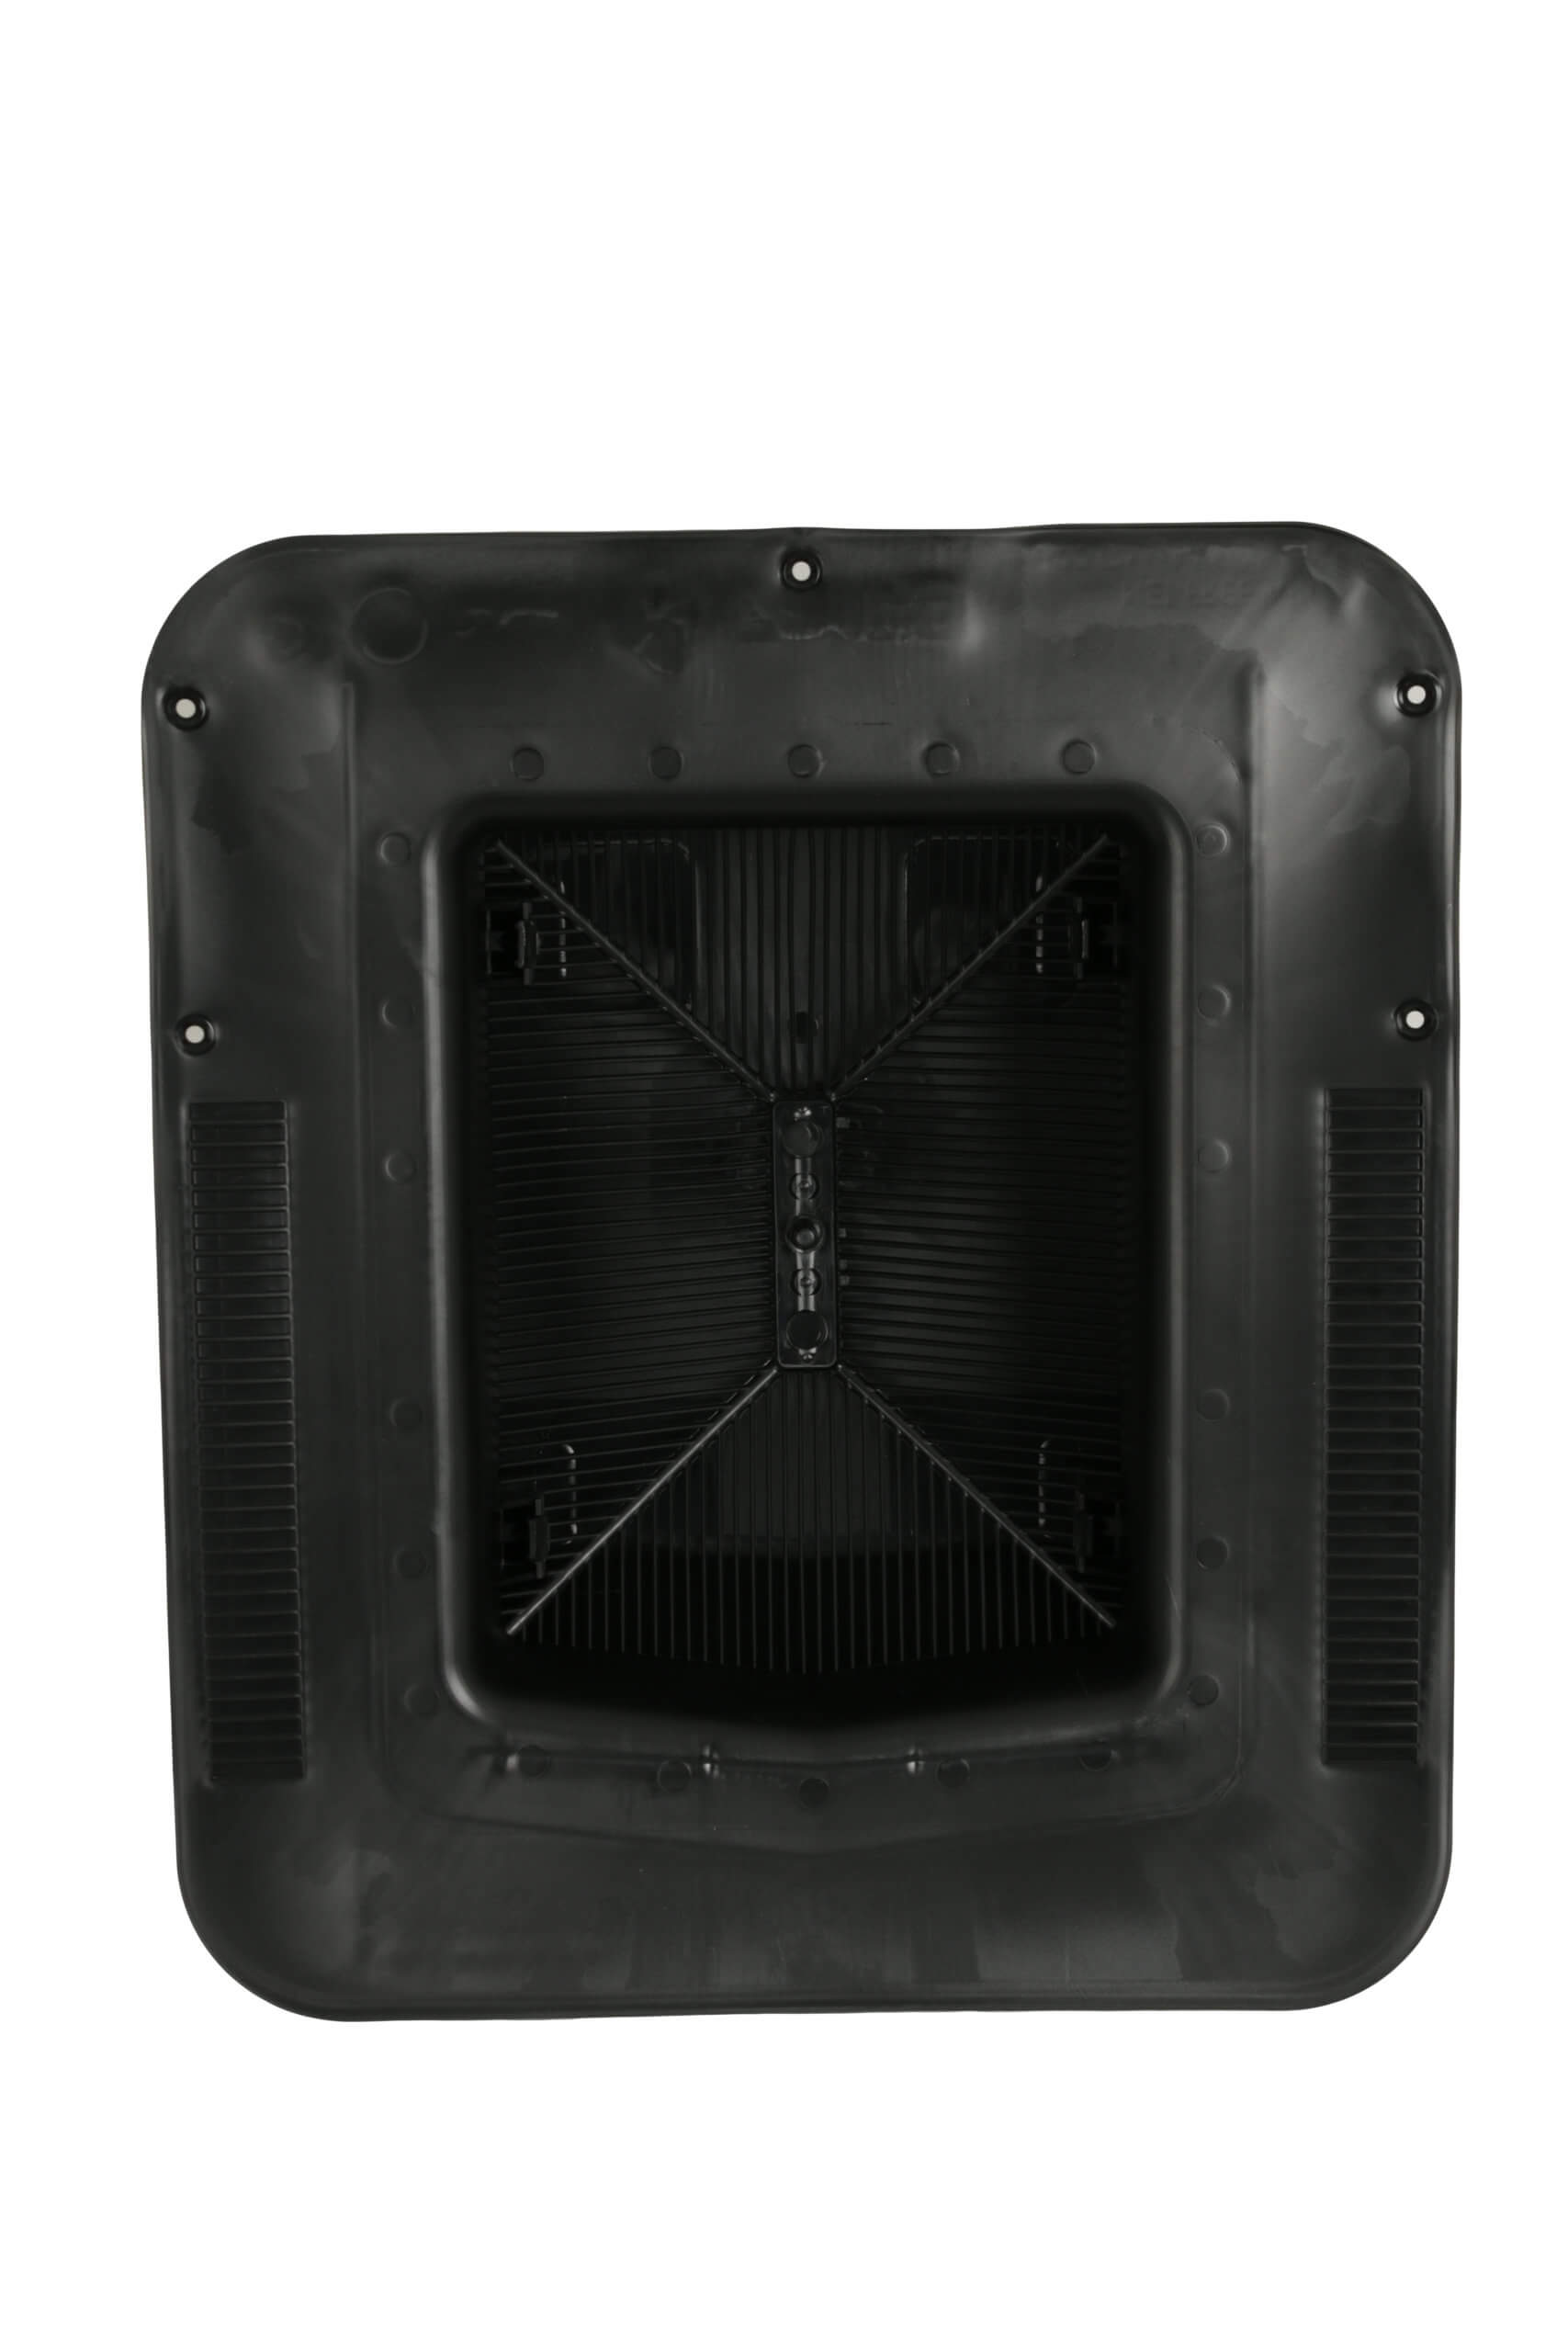 Bottom of plastic roof vent with 50 sq. inch net free area in dark brown.